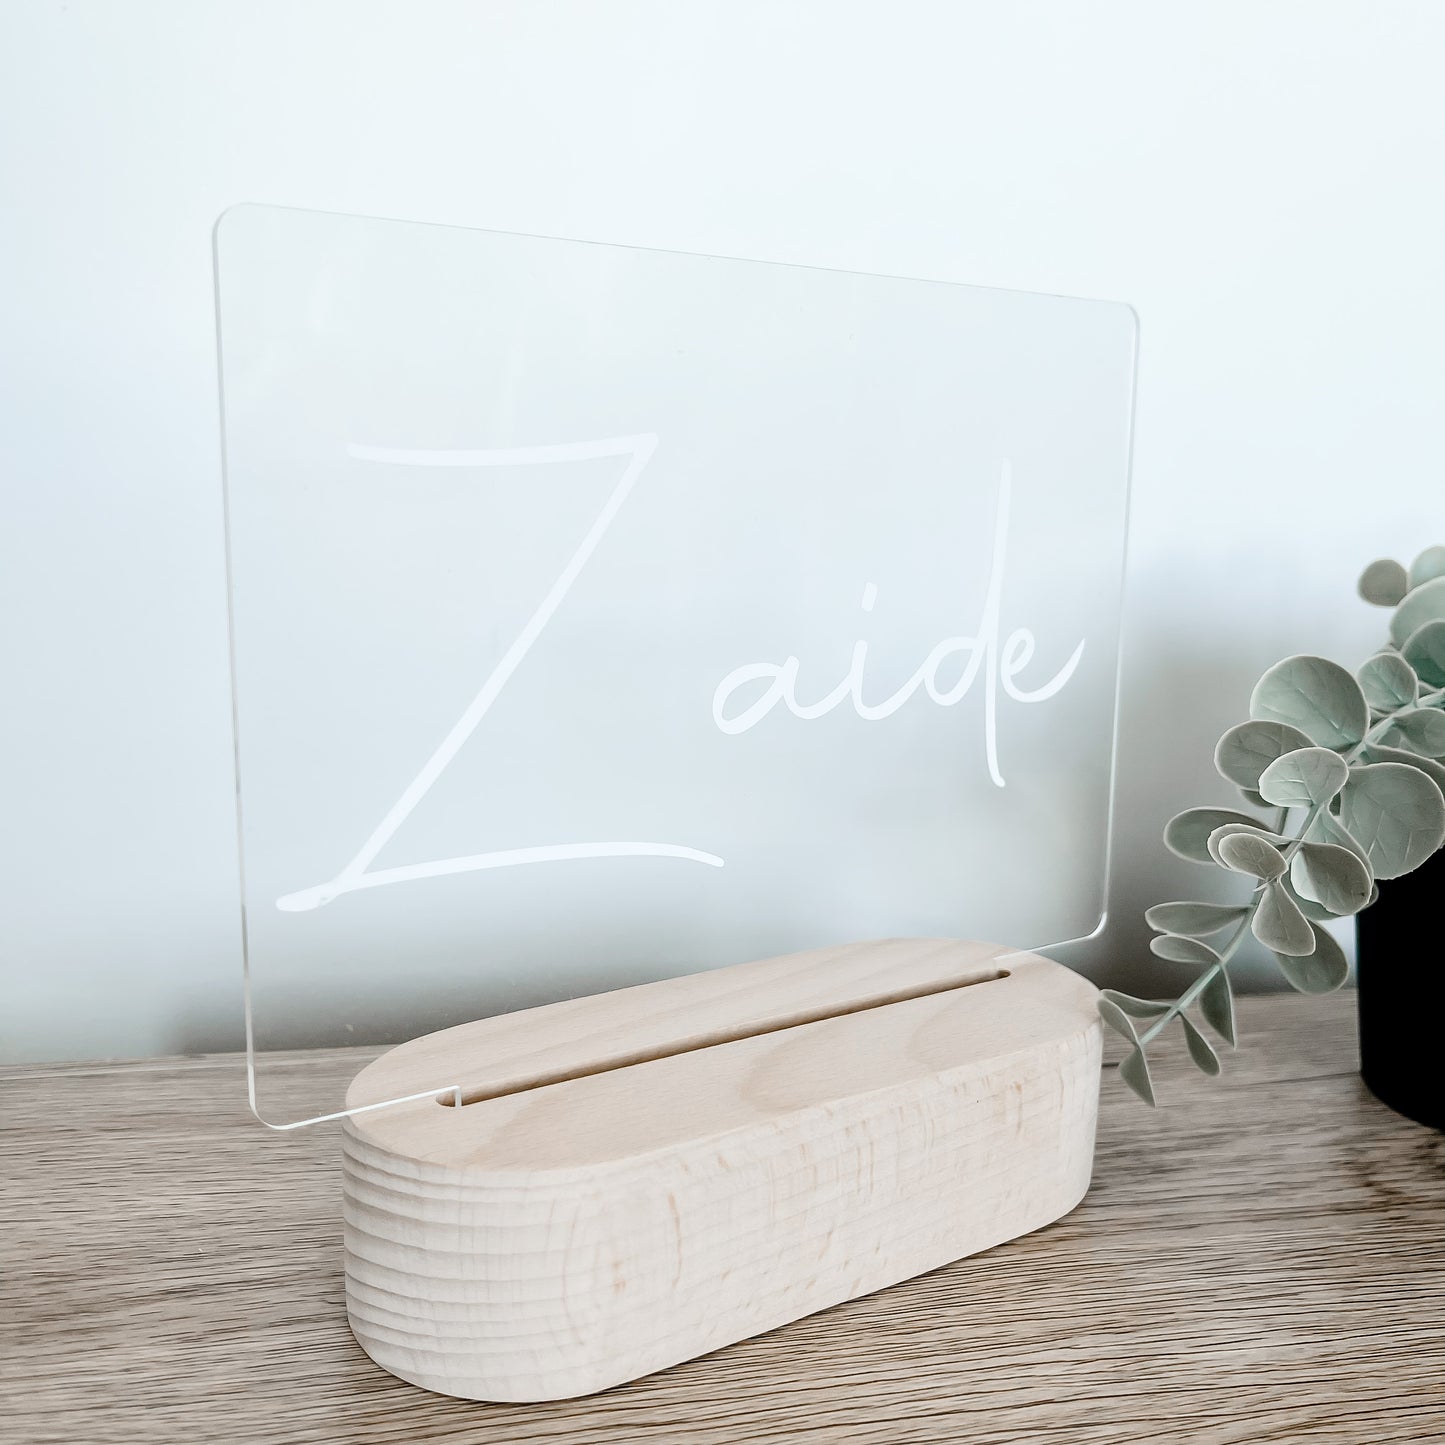 Personalised LED Night Lights - Name Only